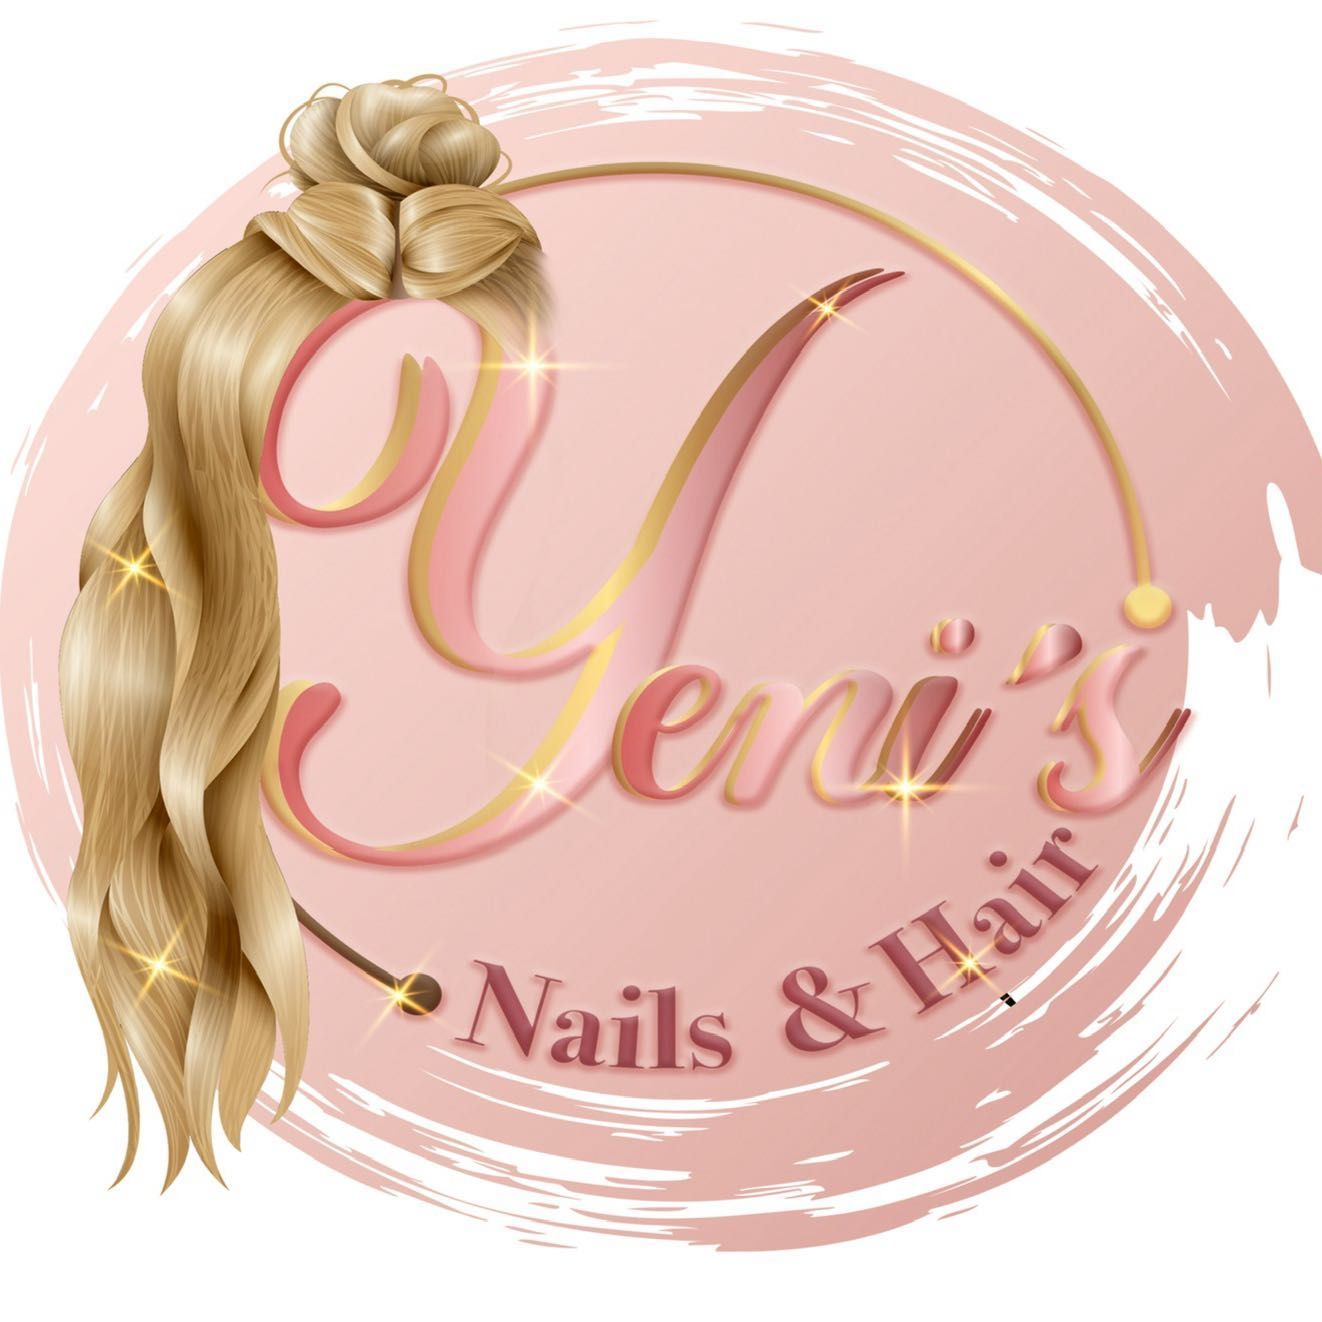 Yeni’s Nails & Hair, 1612 W Waters Ave, Tampa, 33604